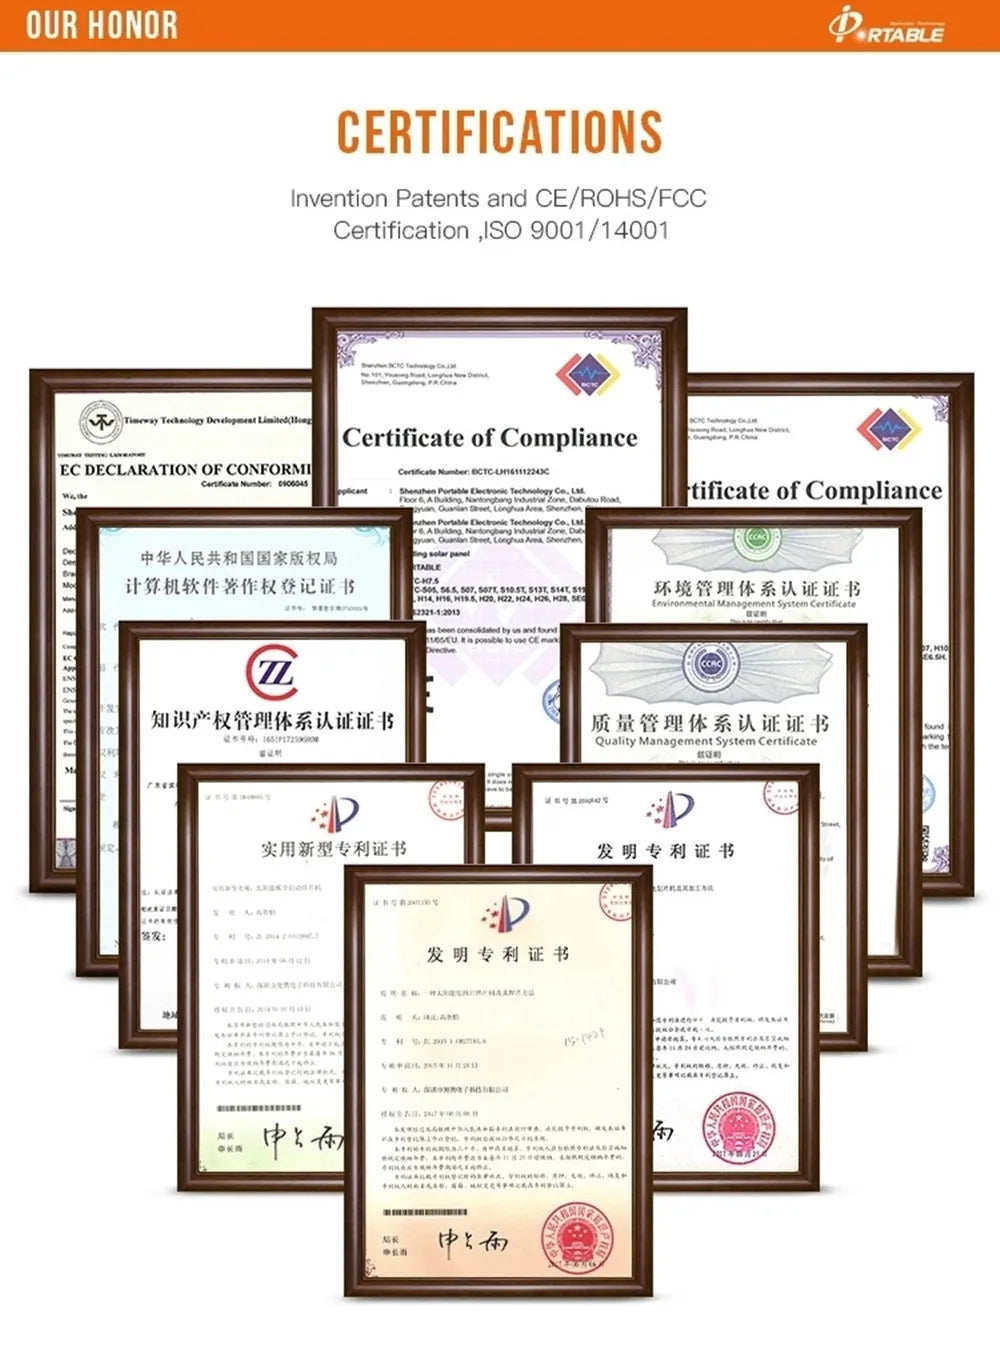 Certified for quality and reliability: CE/ROHS, ISO 9001/14001, and EC Declaration.